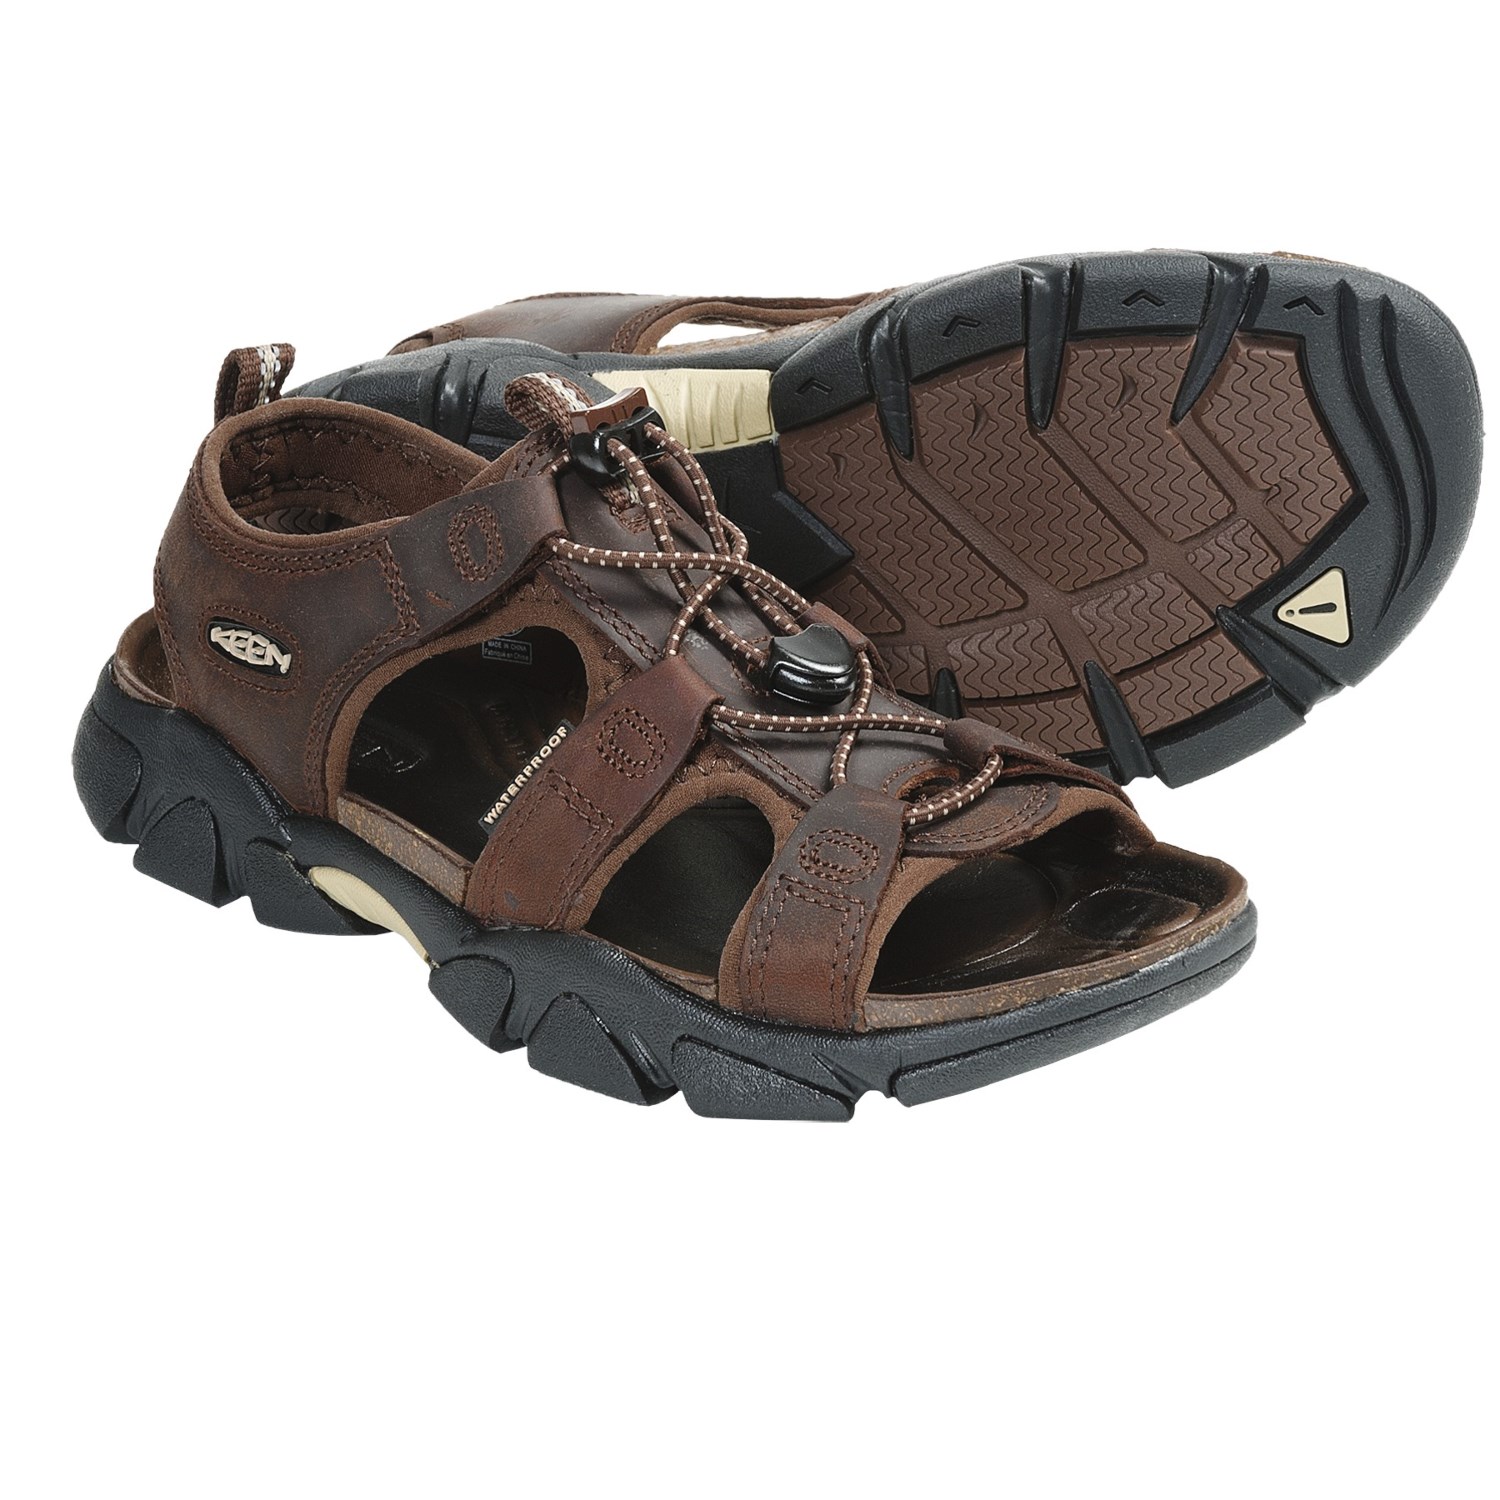 Keen Sarasota Sandals Leather For Women In Friar Brown